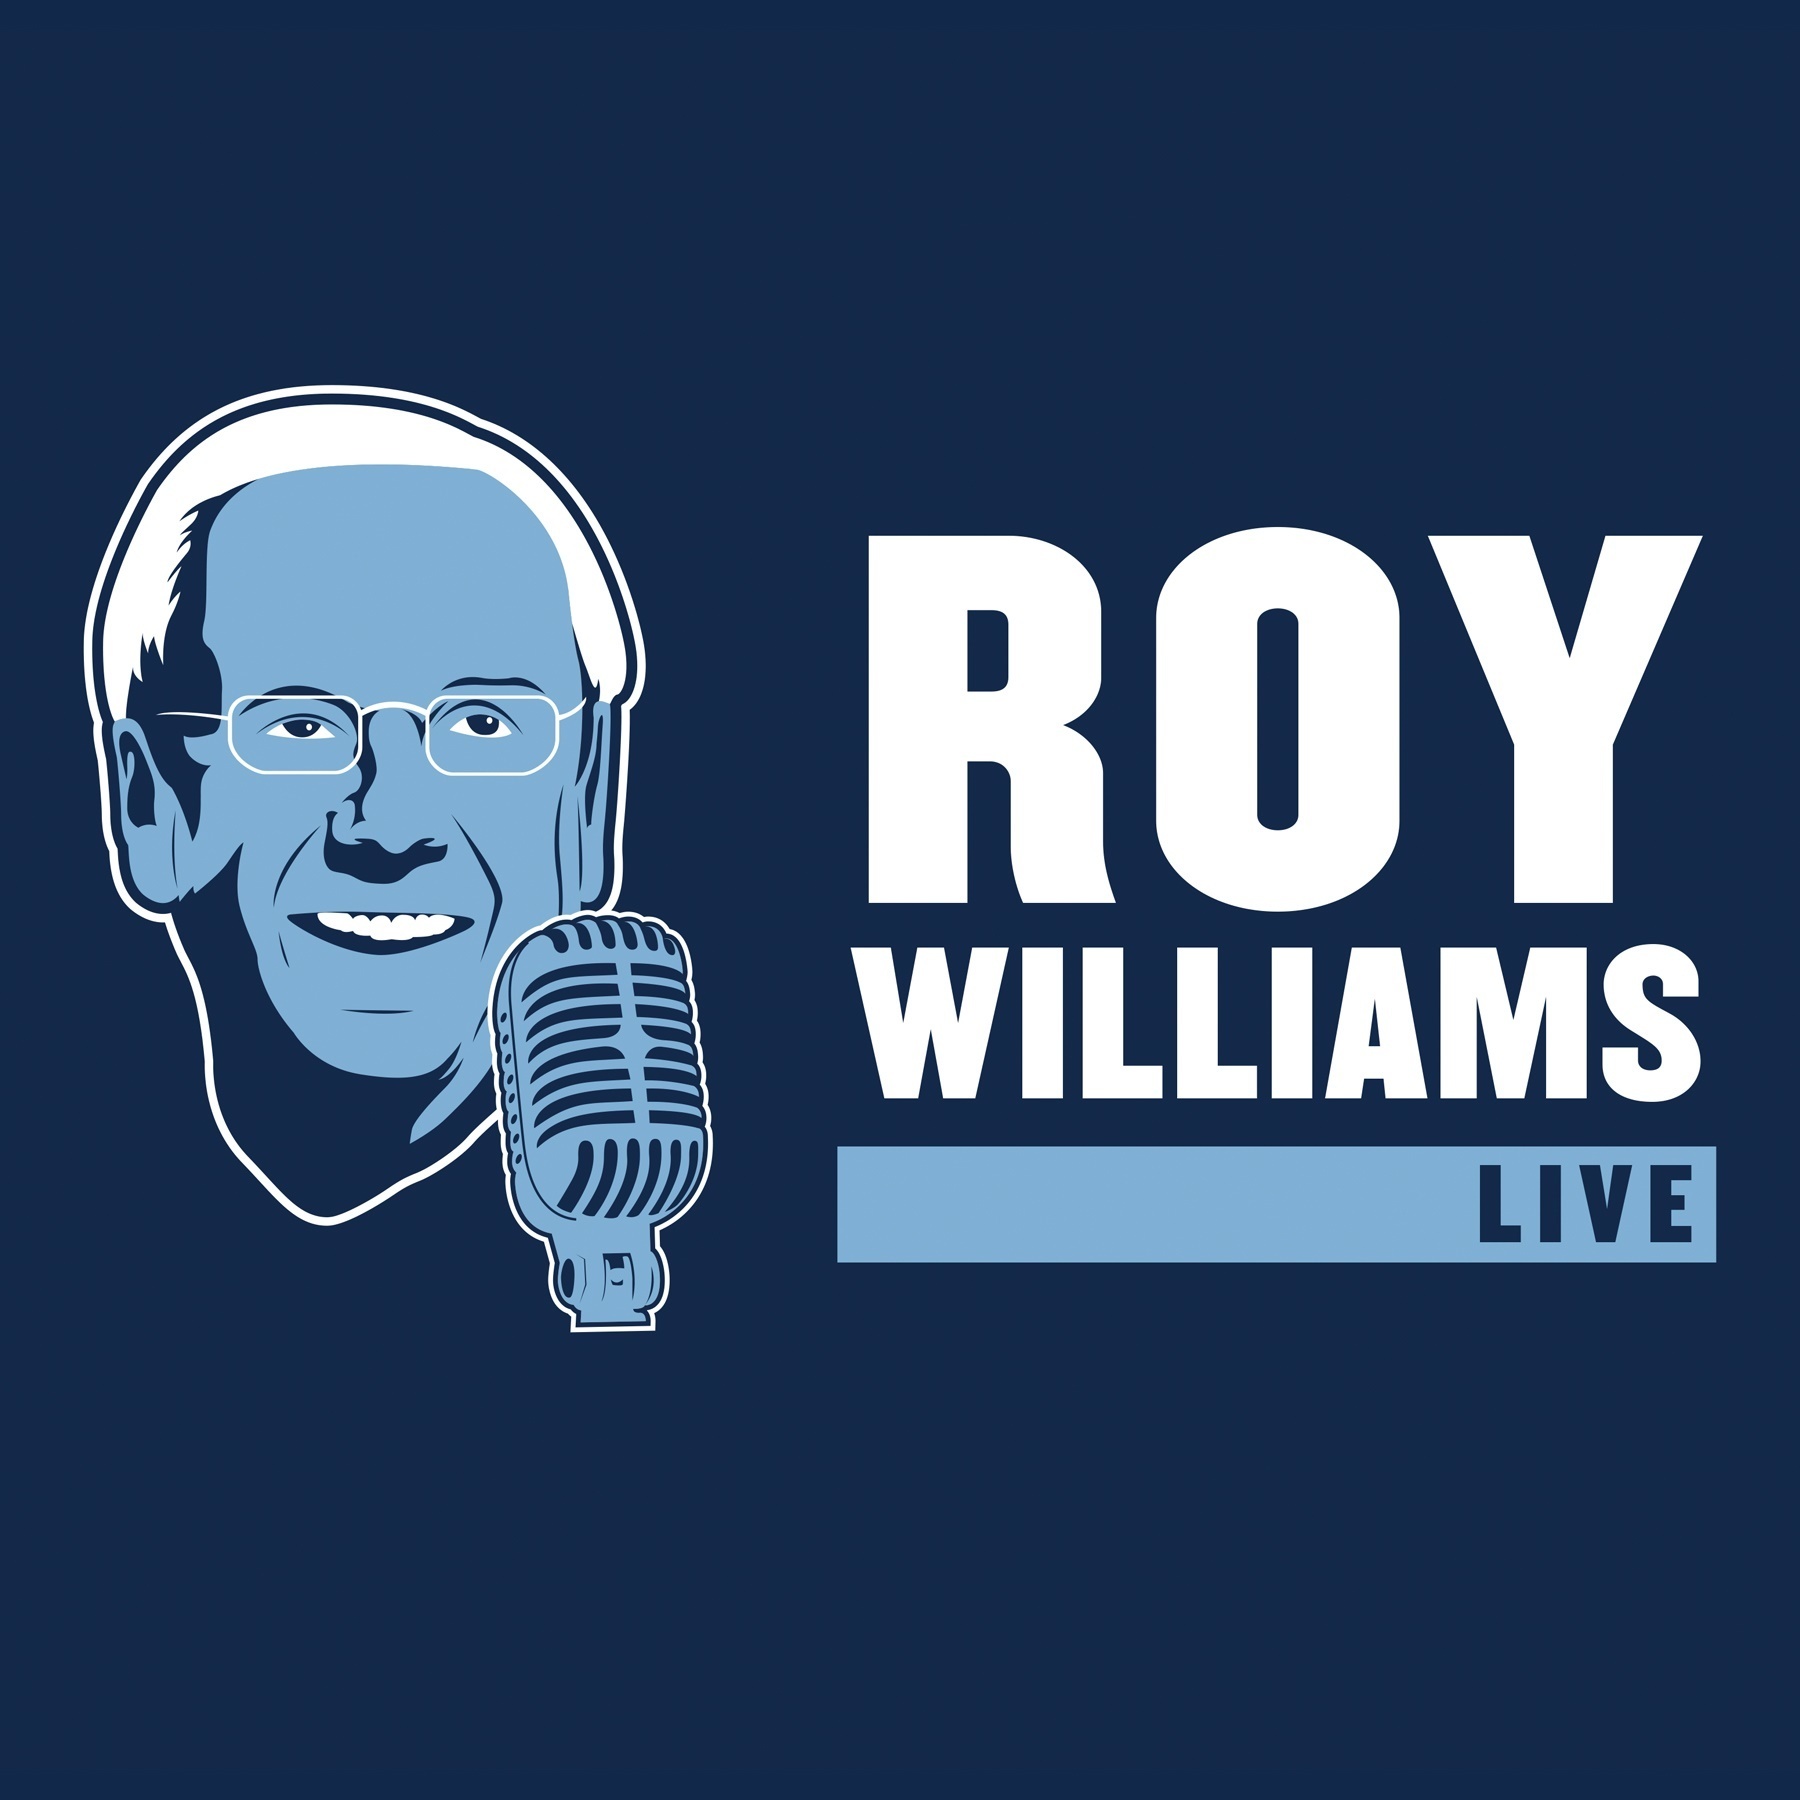 Roy Williams Live from 12/17/18